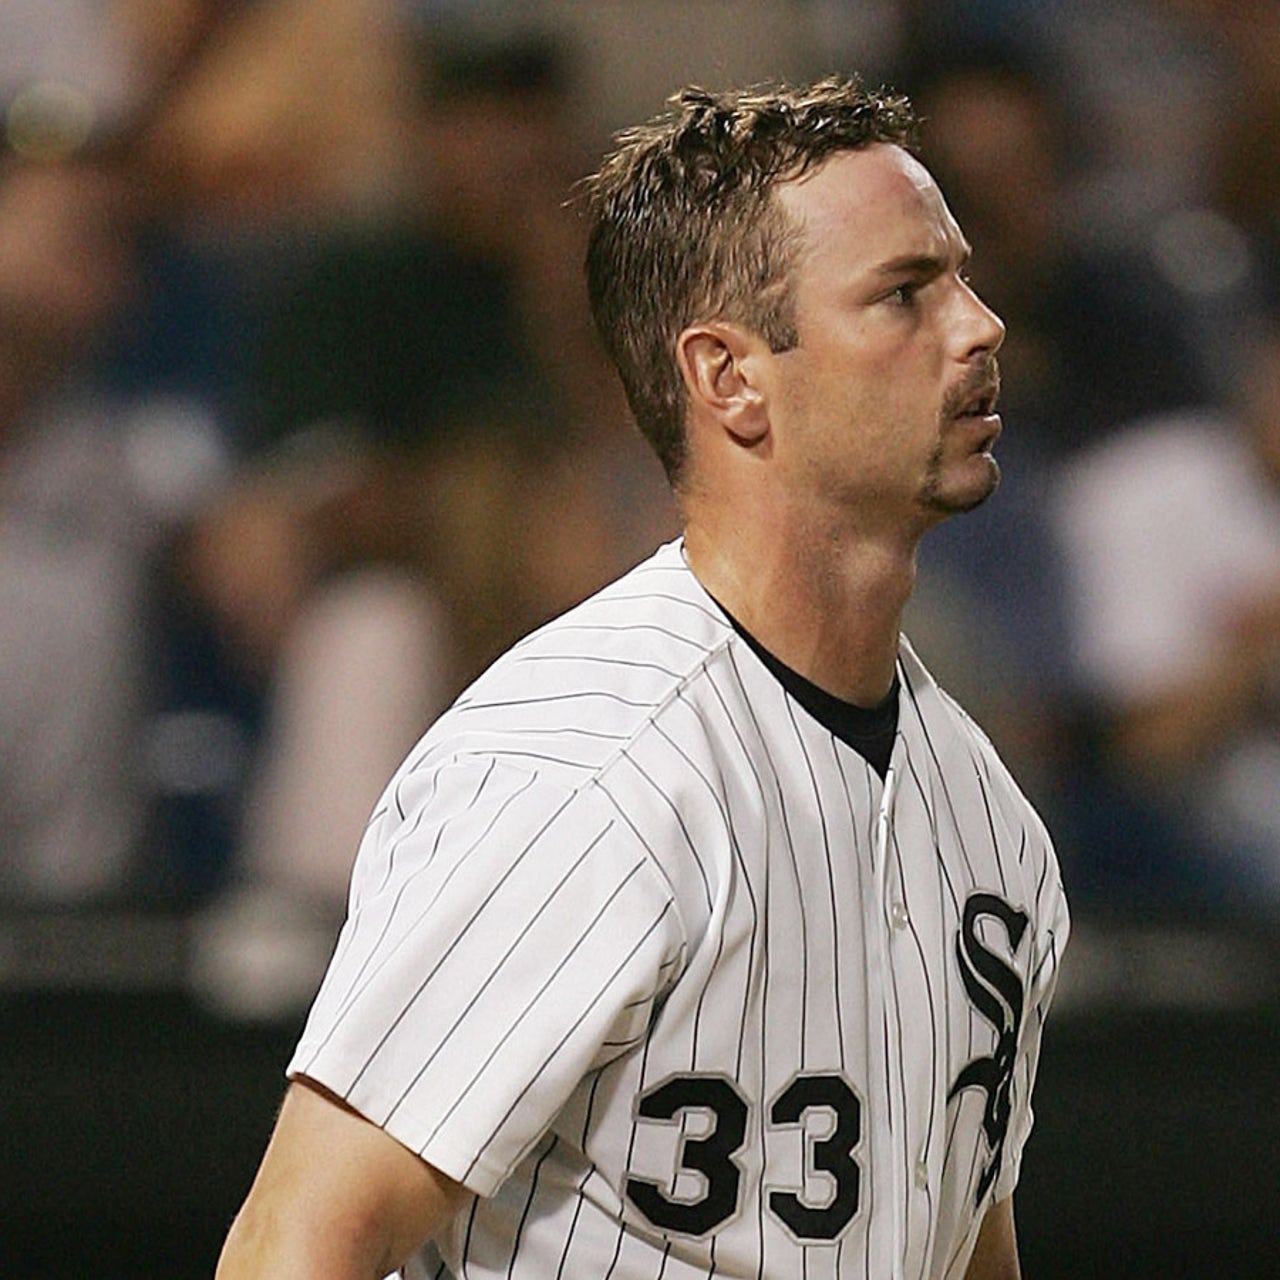 White Sox bring back Aaron Rowand in front office role